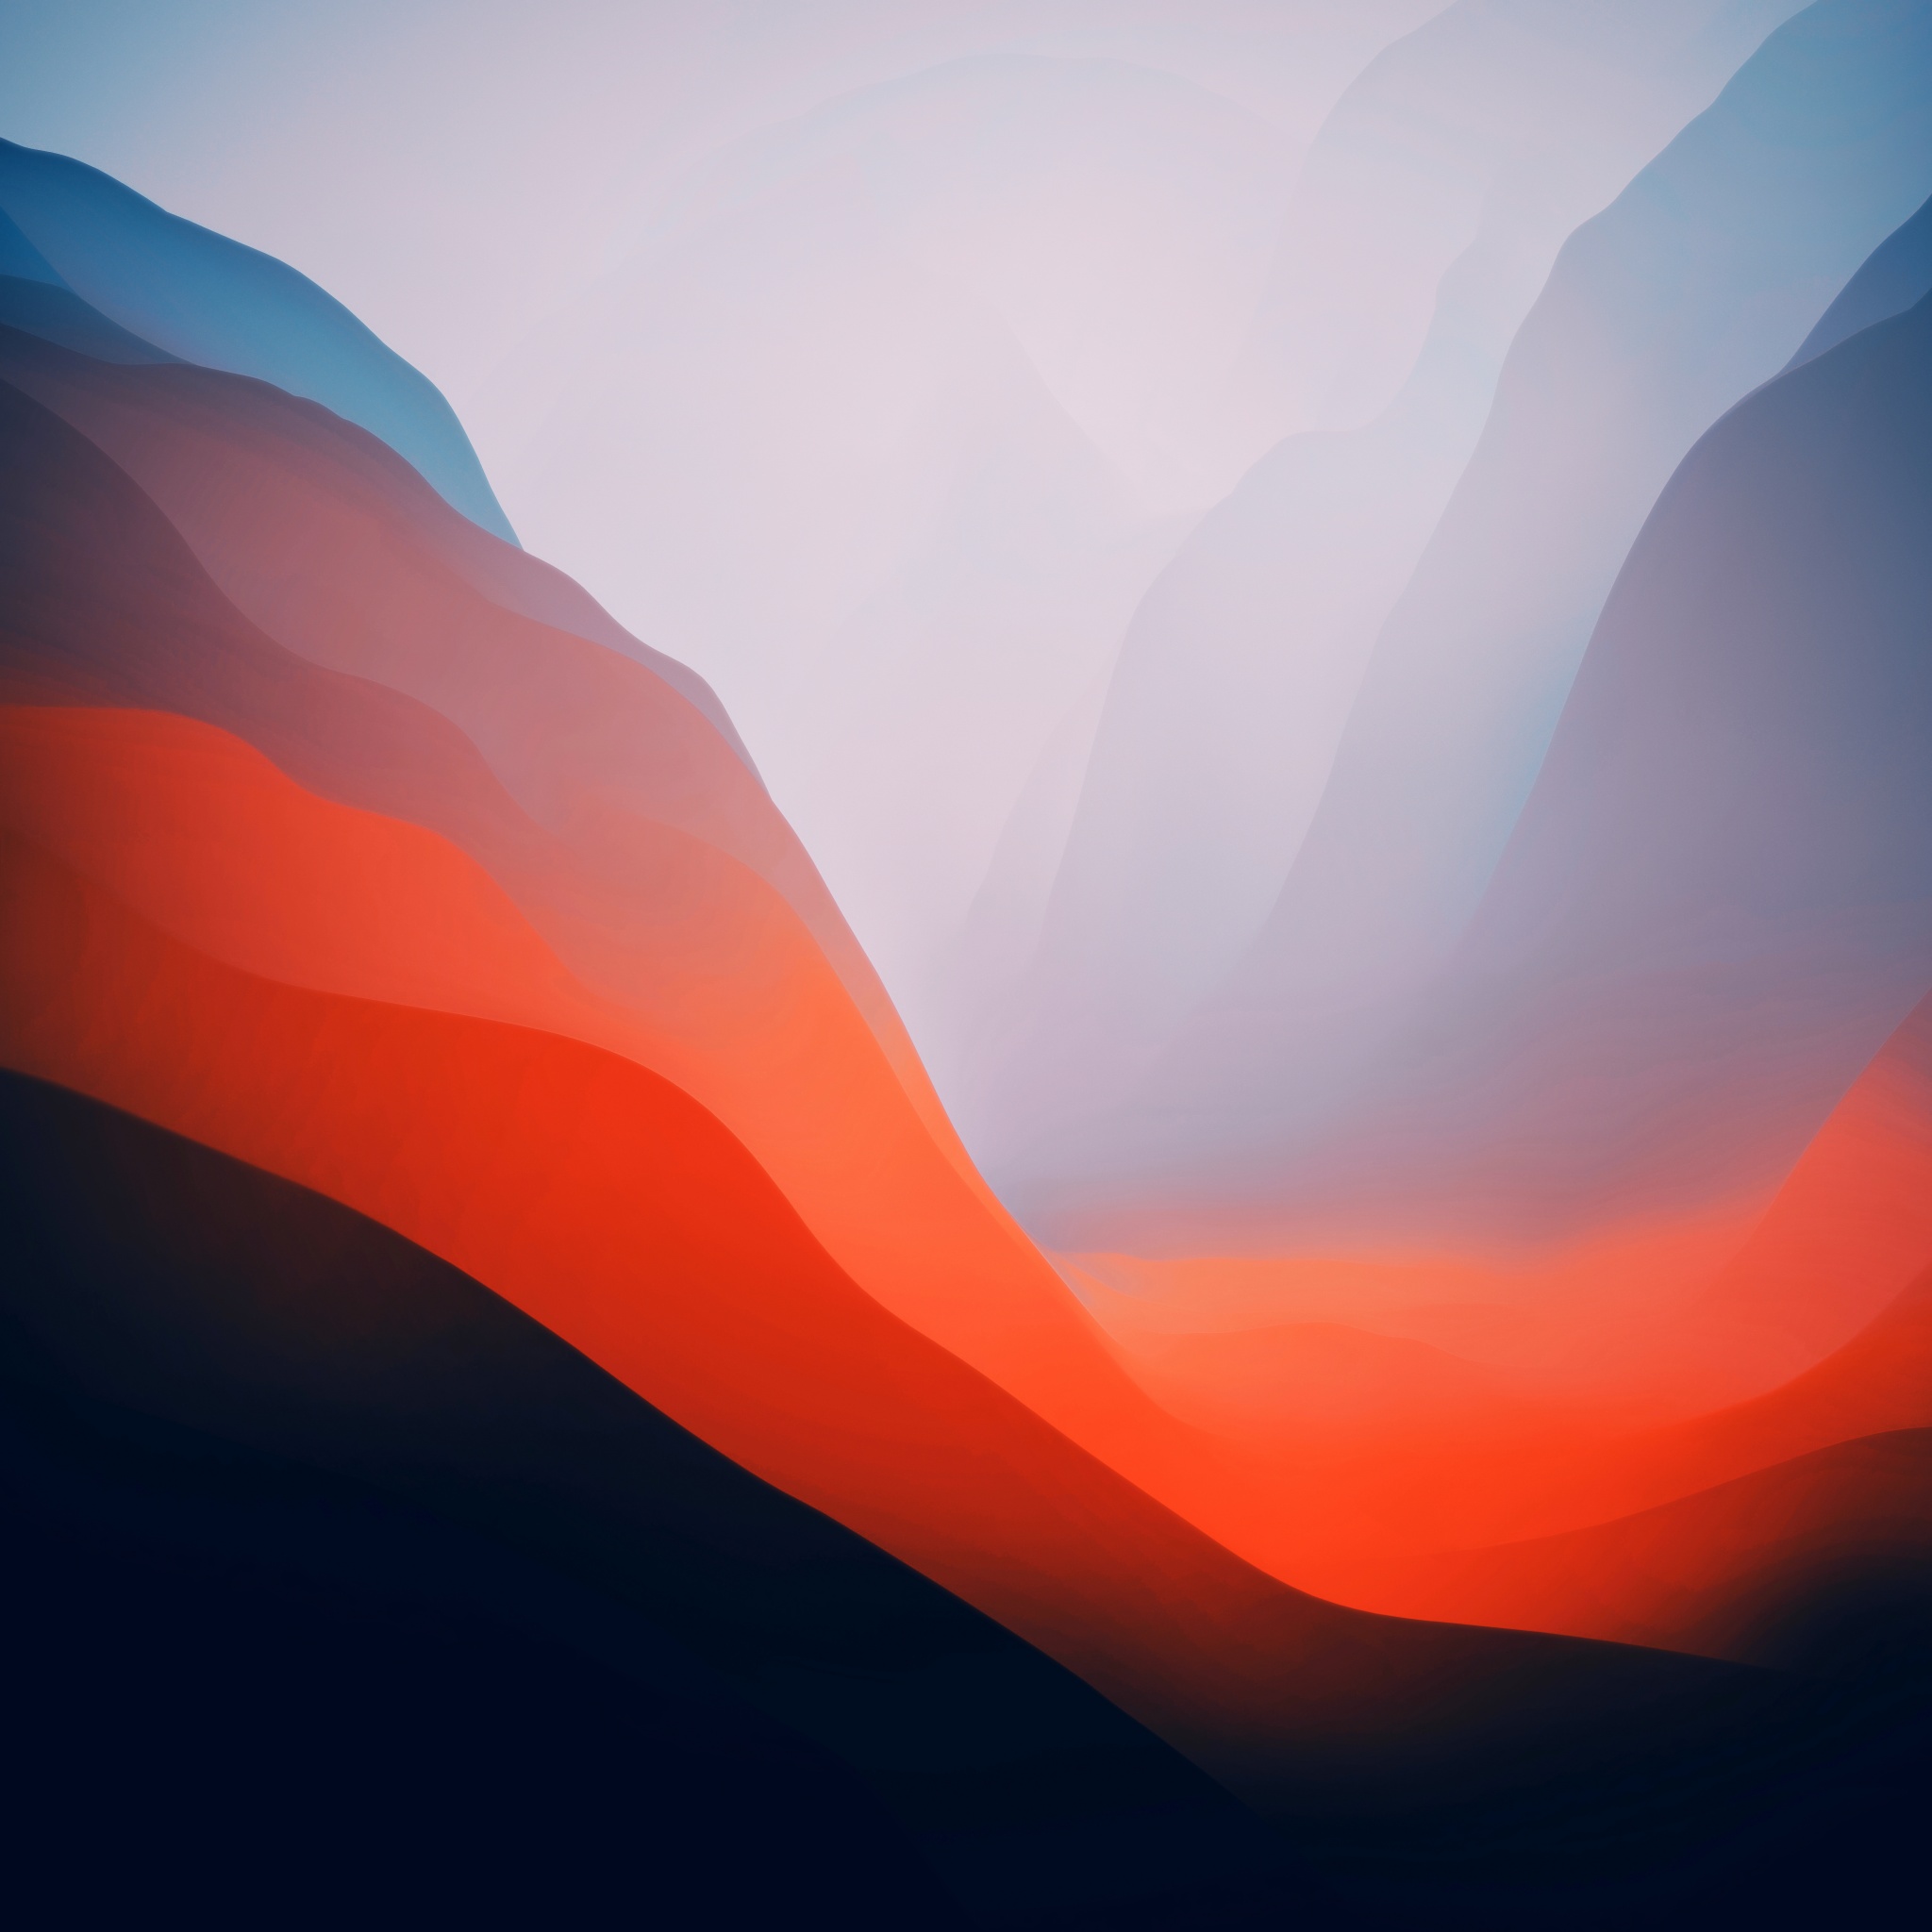 HD wallpaper blue orange red and teal abstract painting background  texture  Wallpaper Flare